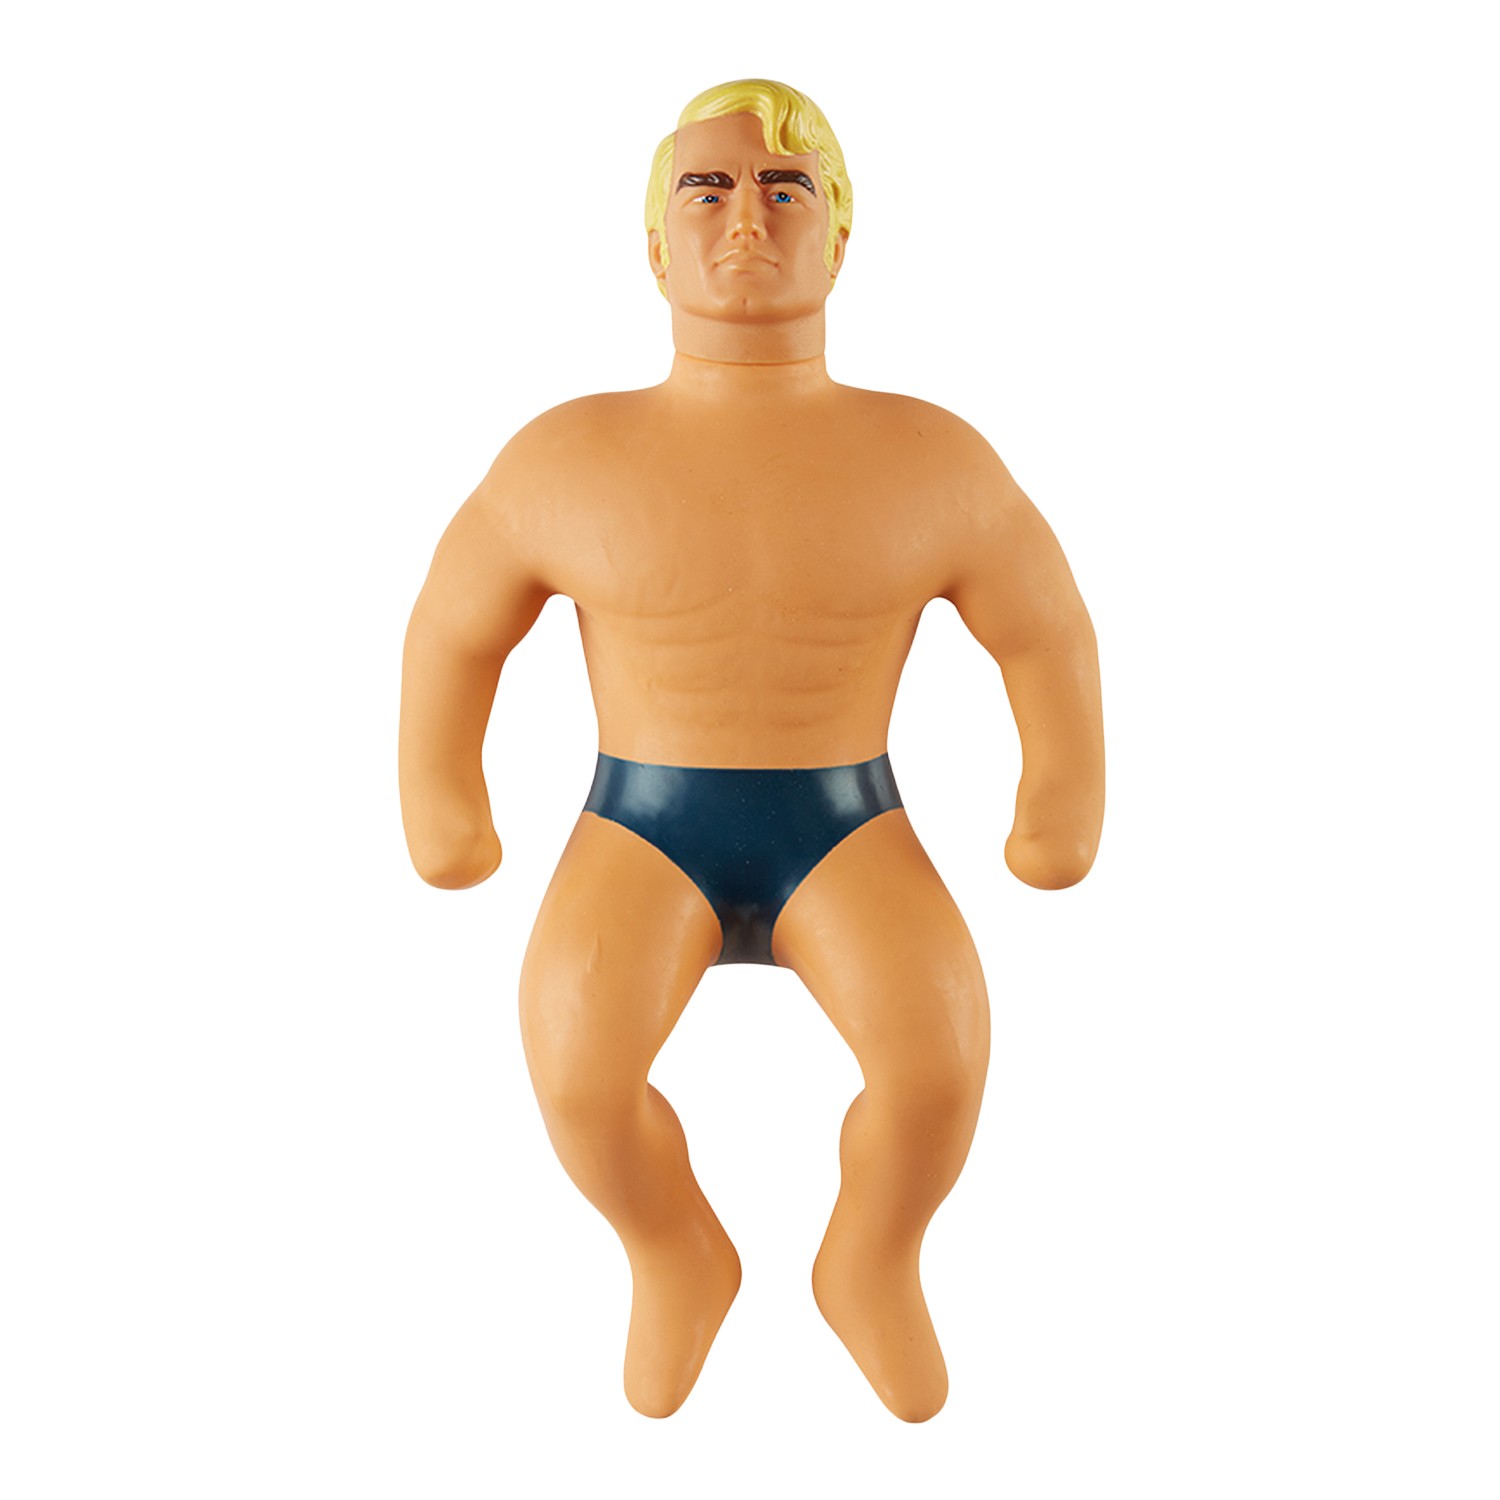 NUOVO Stretch Armstrong 7 pollici Armstrong Figura in Scatola 